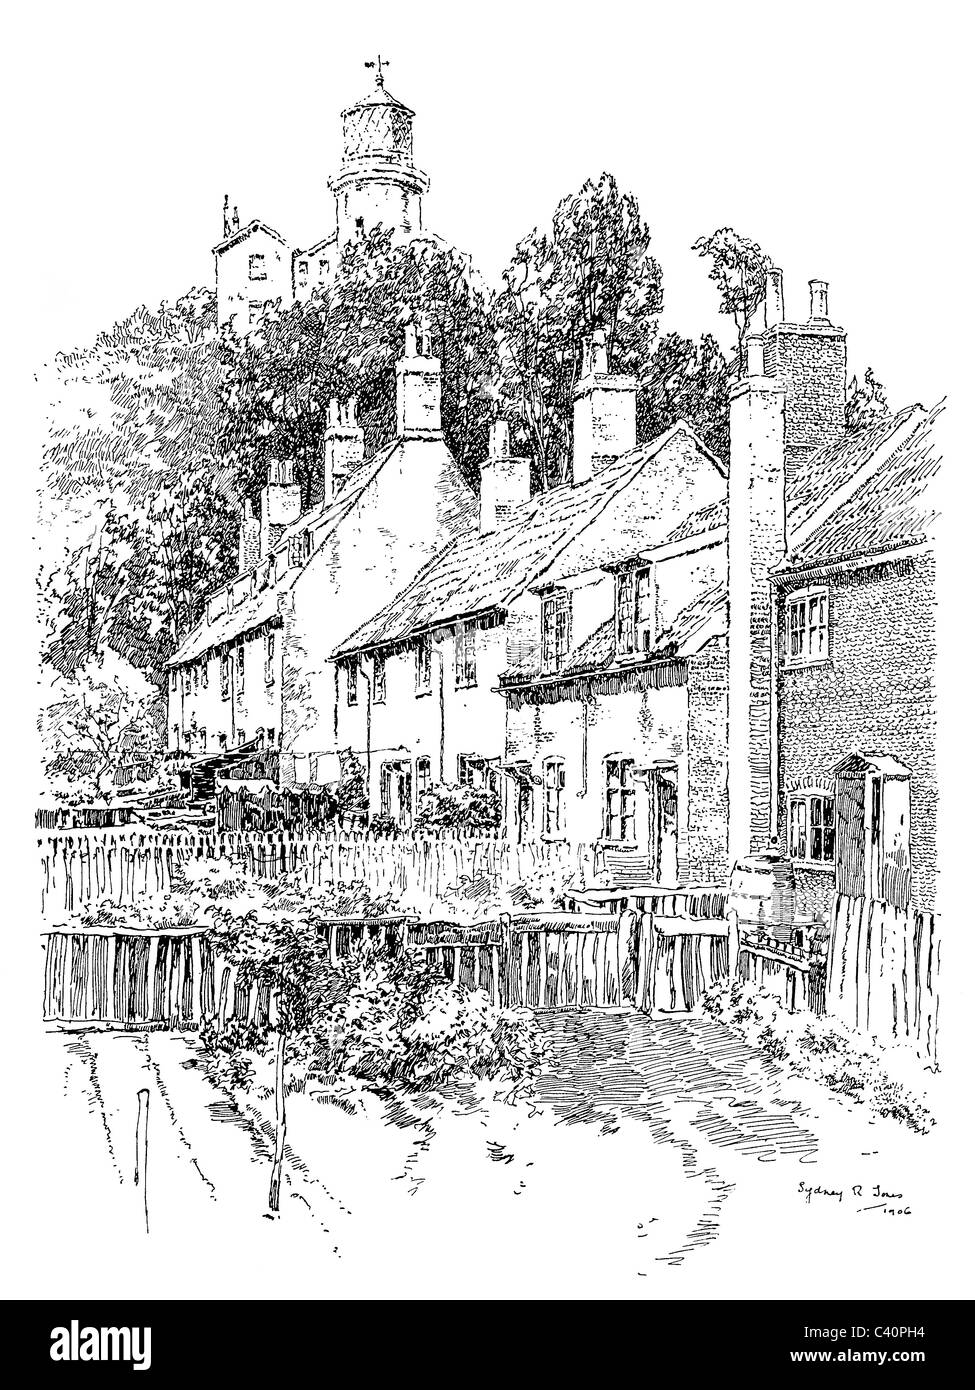 Lowestoft, Suffolk - pen and ink illustration from 'Old English Country Cottages' by Charles Holme, 1906. Stock Photo